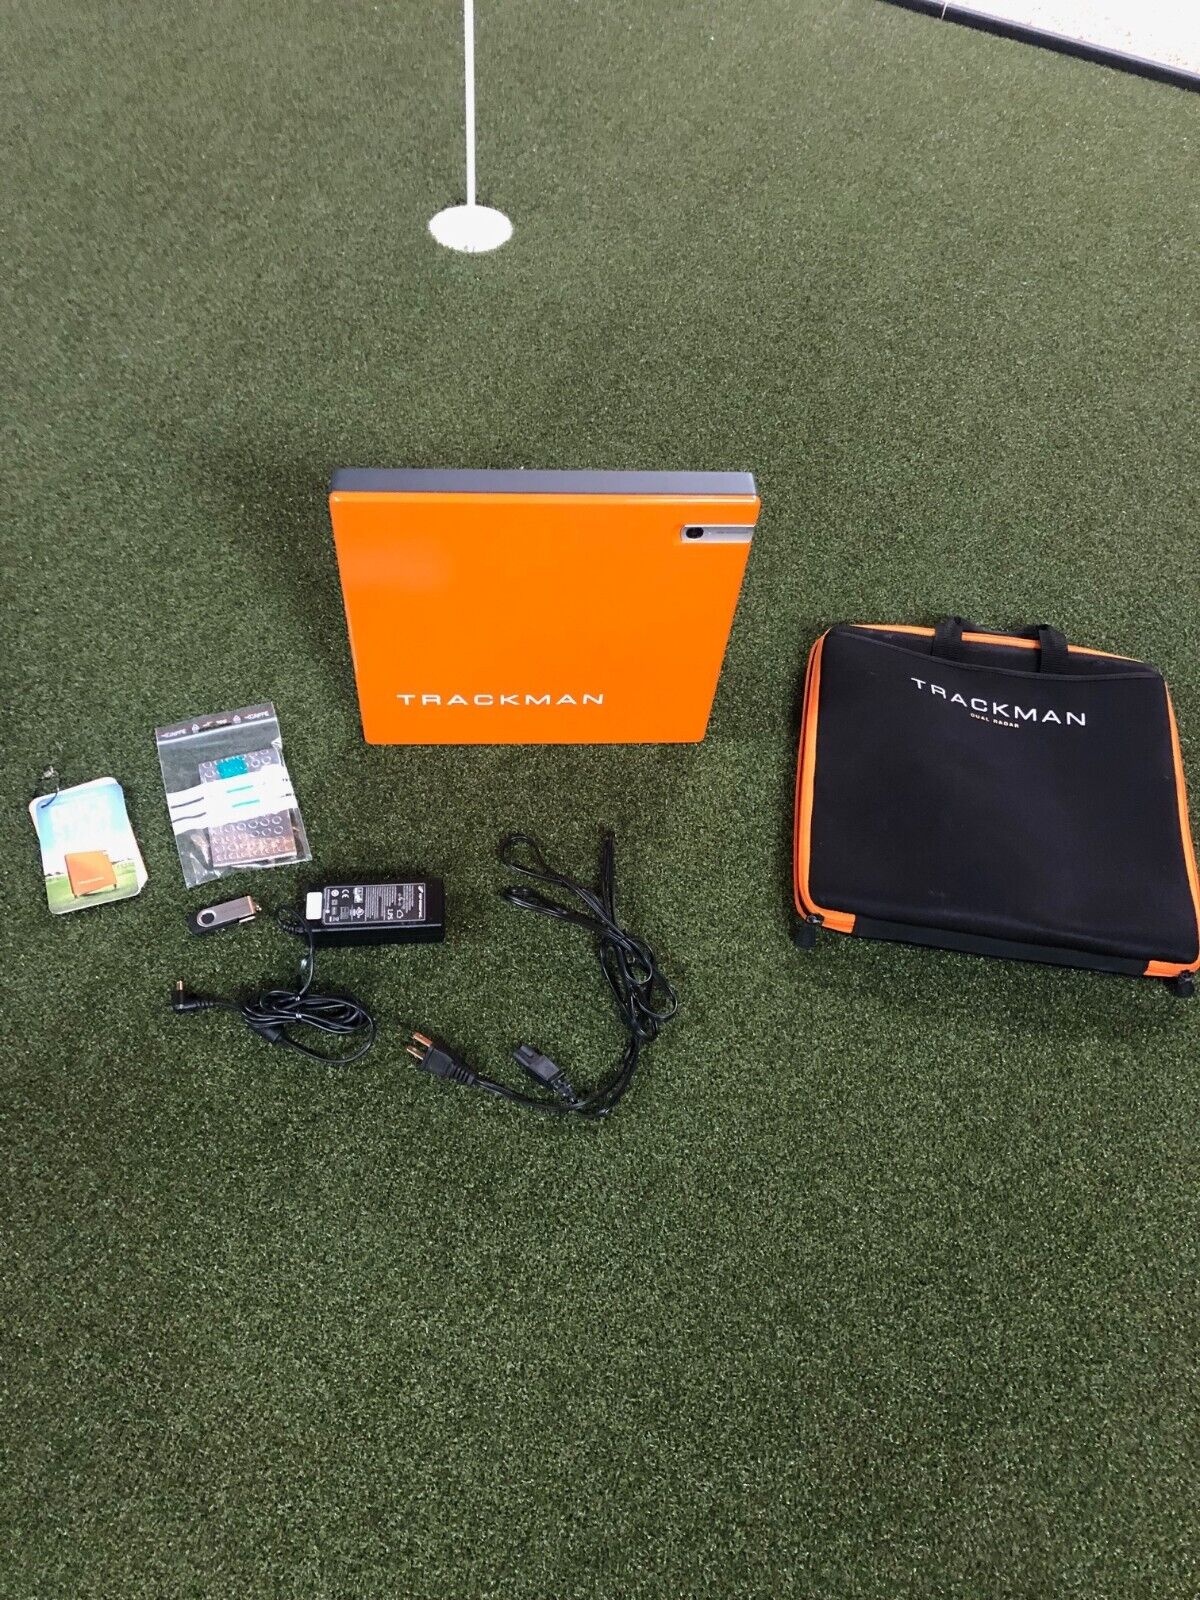 TRACKMAN 4 Indoor and Outdoor Excellent Condition!  Used by PGA Tour Player